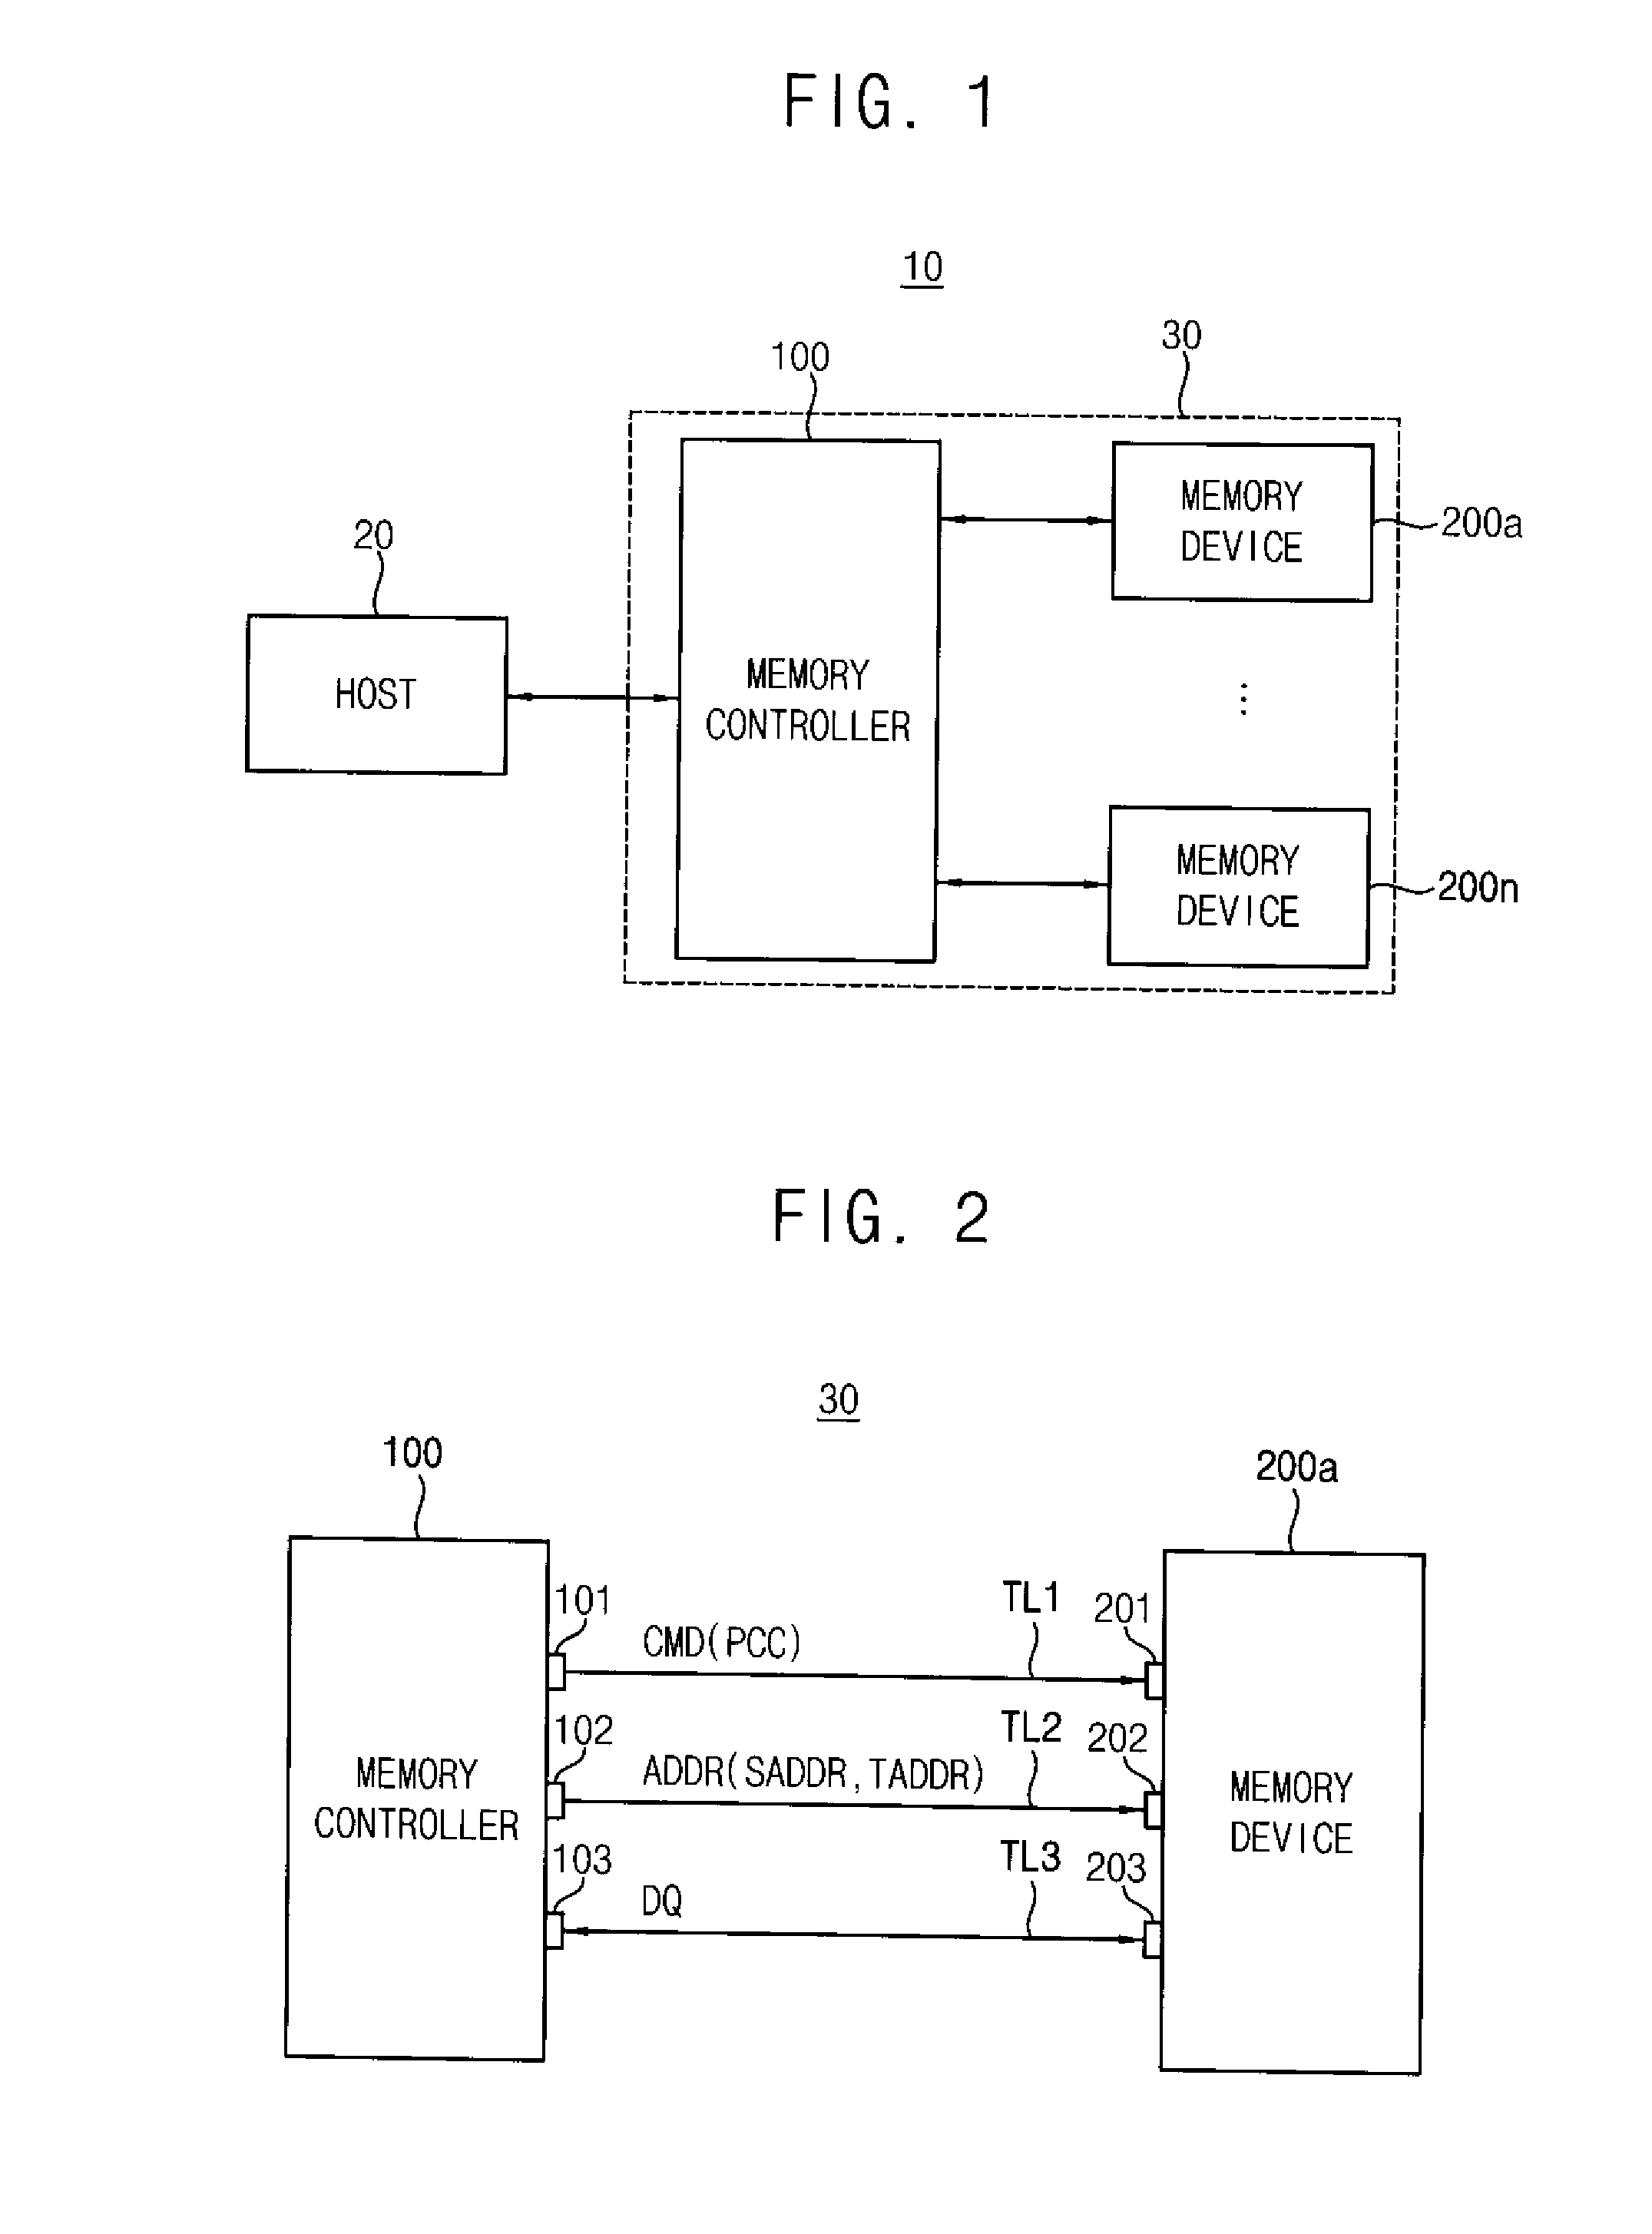 Methods of copying a page in a memory device and methods of managing pages in a memory system